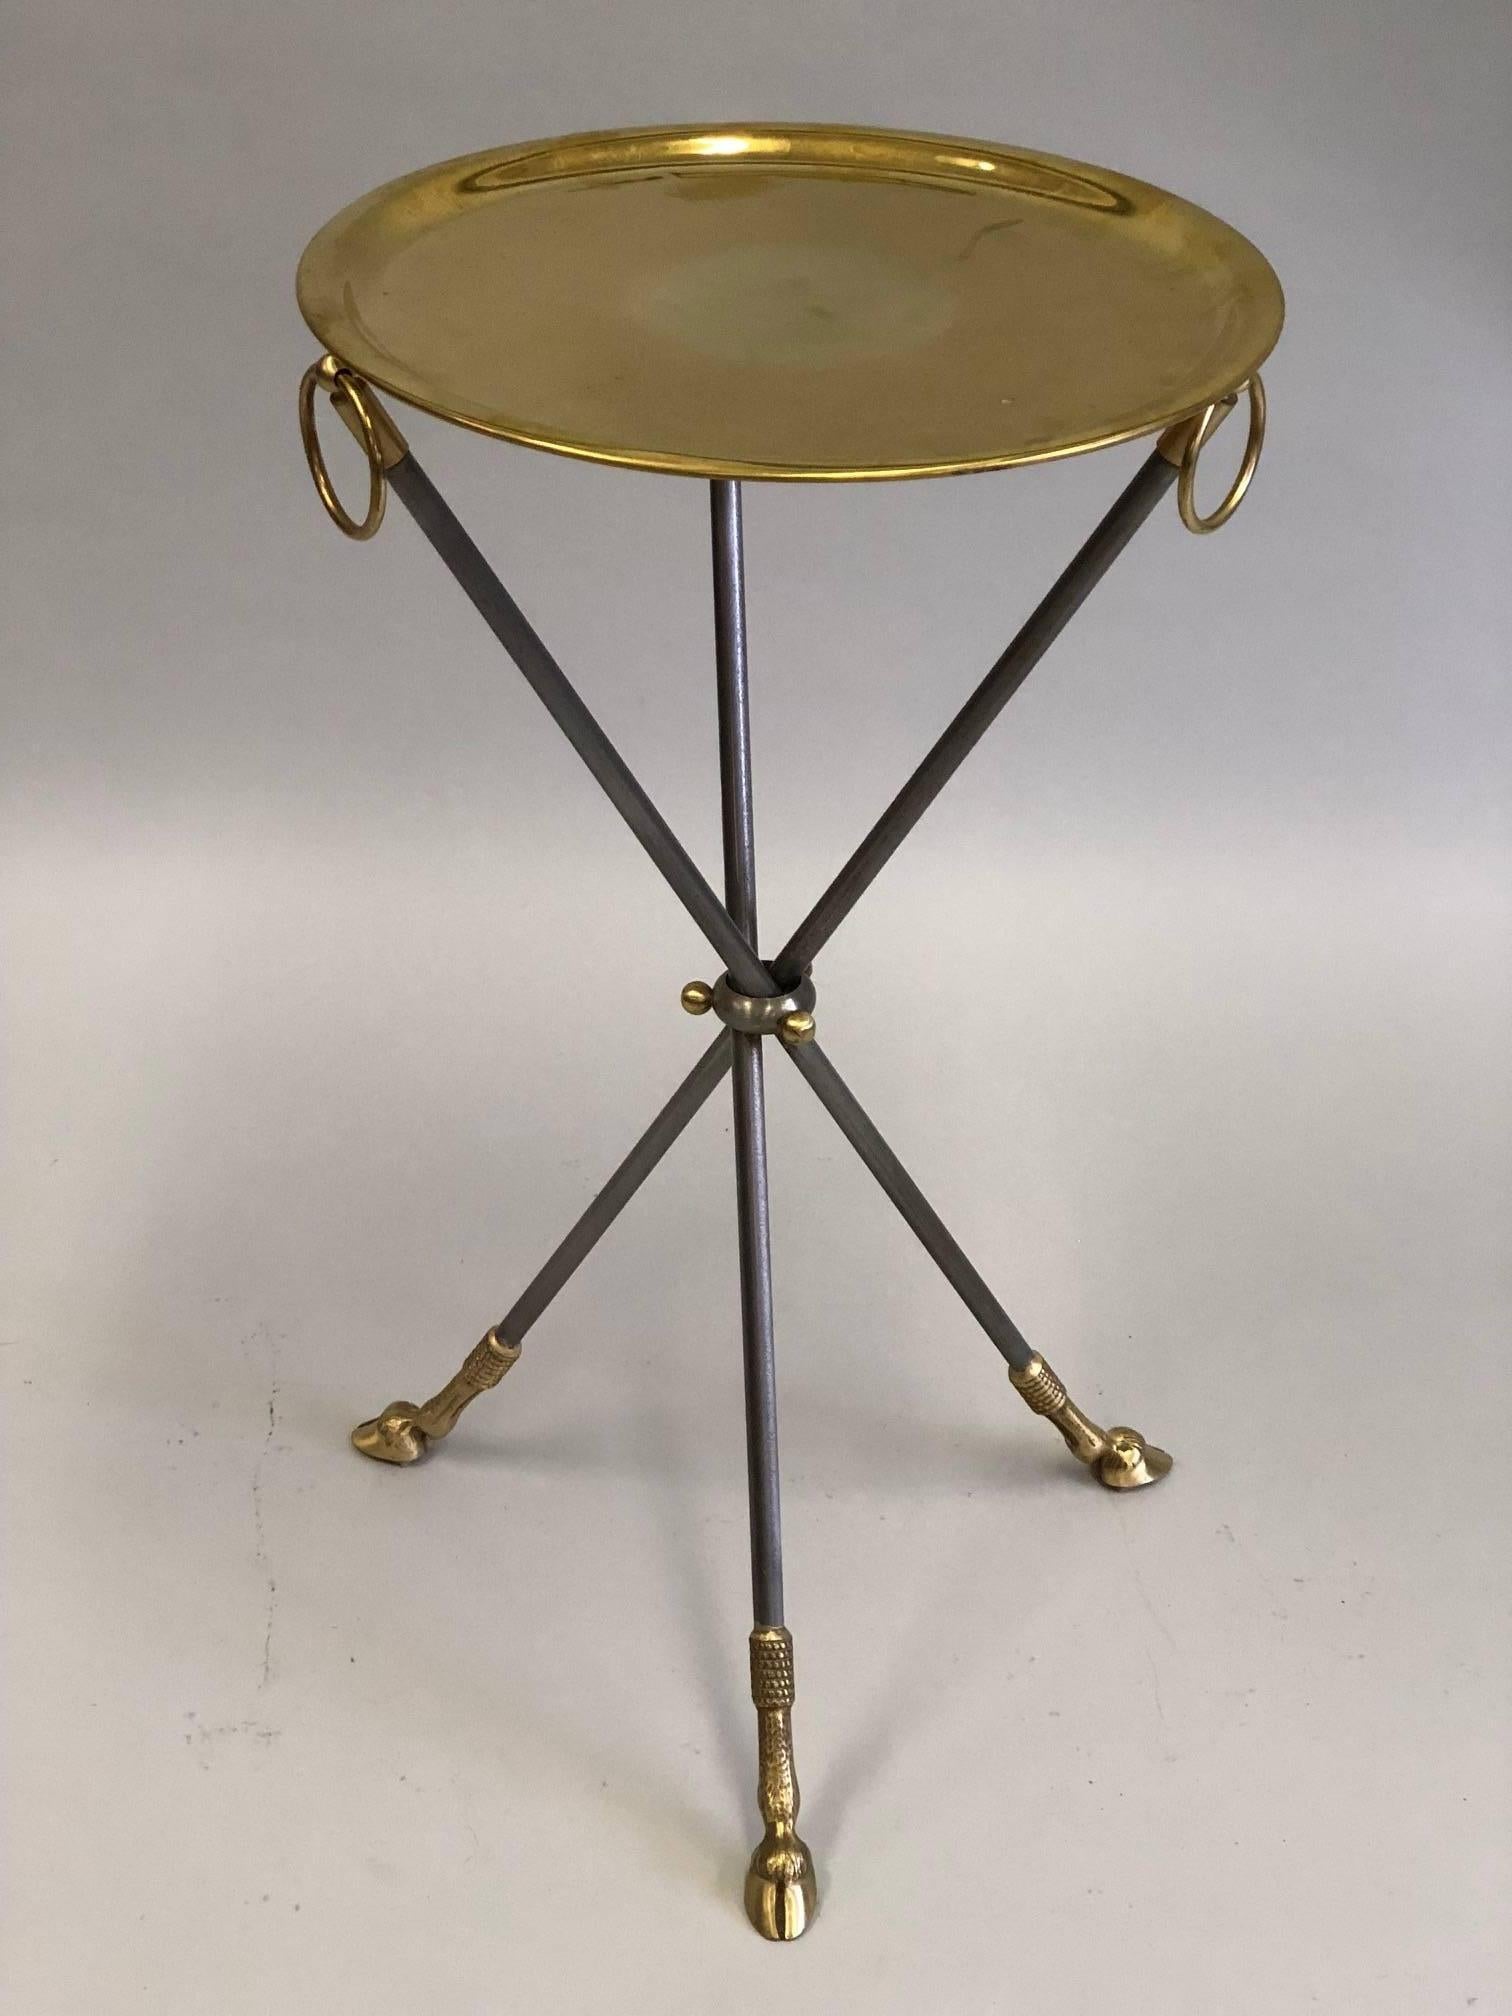 Elegant, timeless pair of French midcentury gueridon or end tables in the modern neoclassical spirit by Maison Baguès.

The pieces are composed of a tripod base resting on three hoofed solid brass feet. Which supports three steel legs that unite